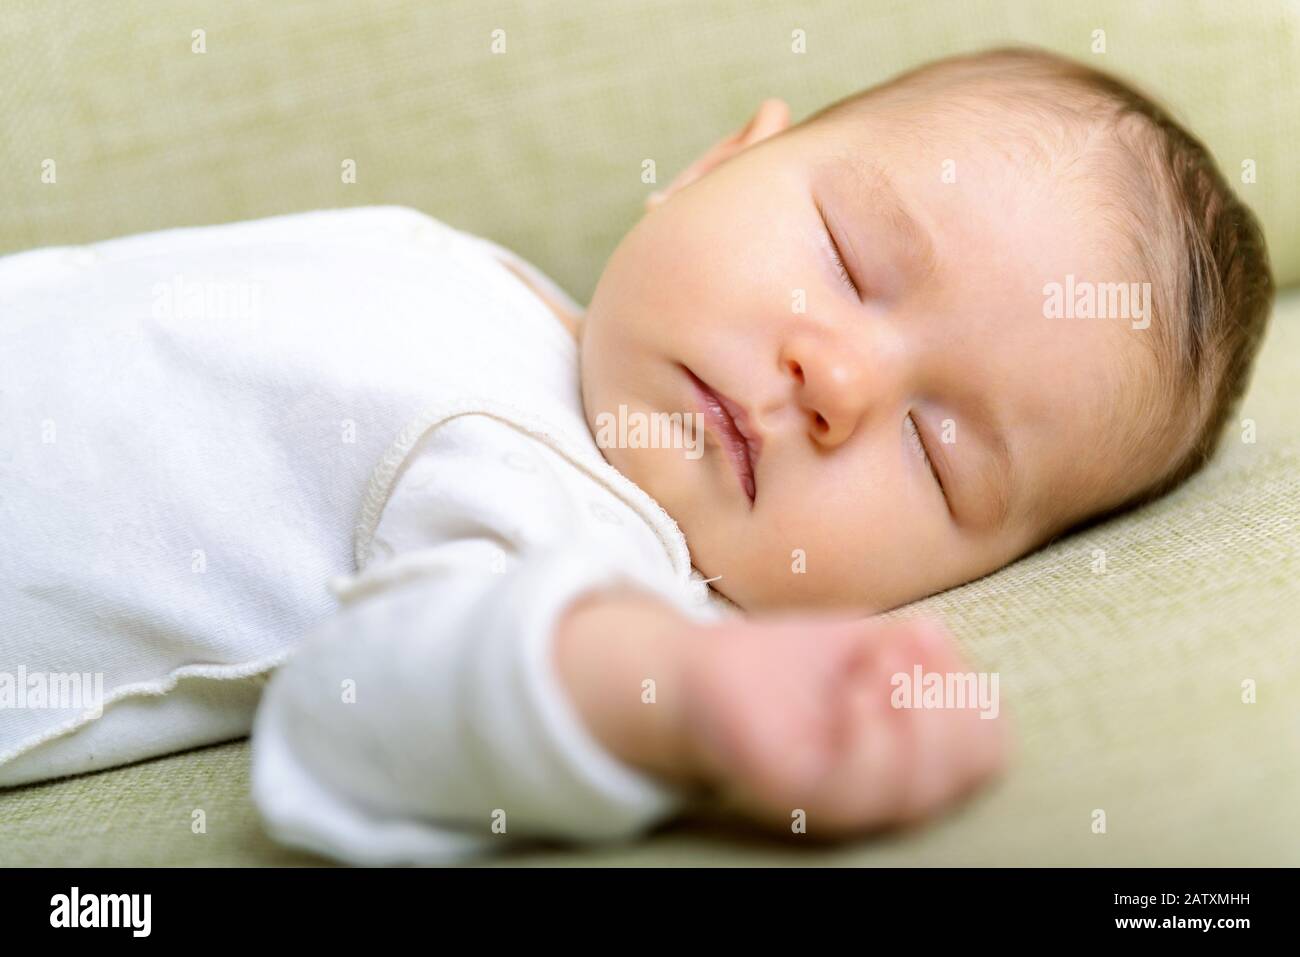 Newborn baby is sleeping peacefully at home Stock Photo